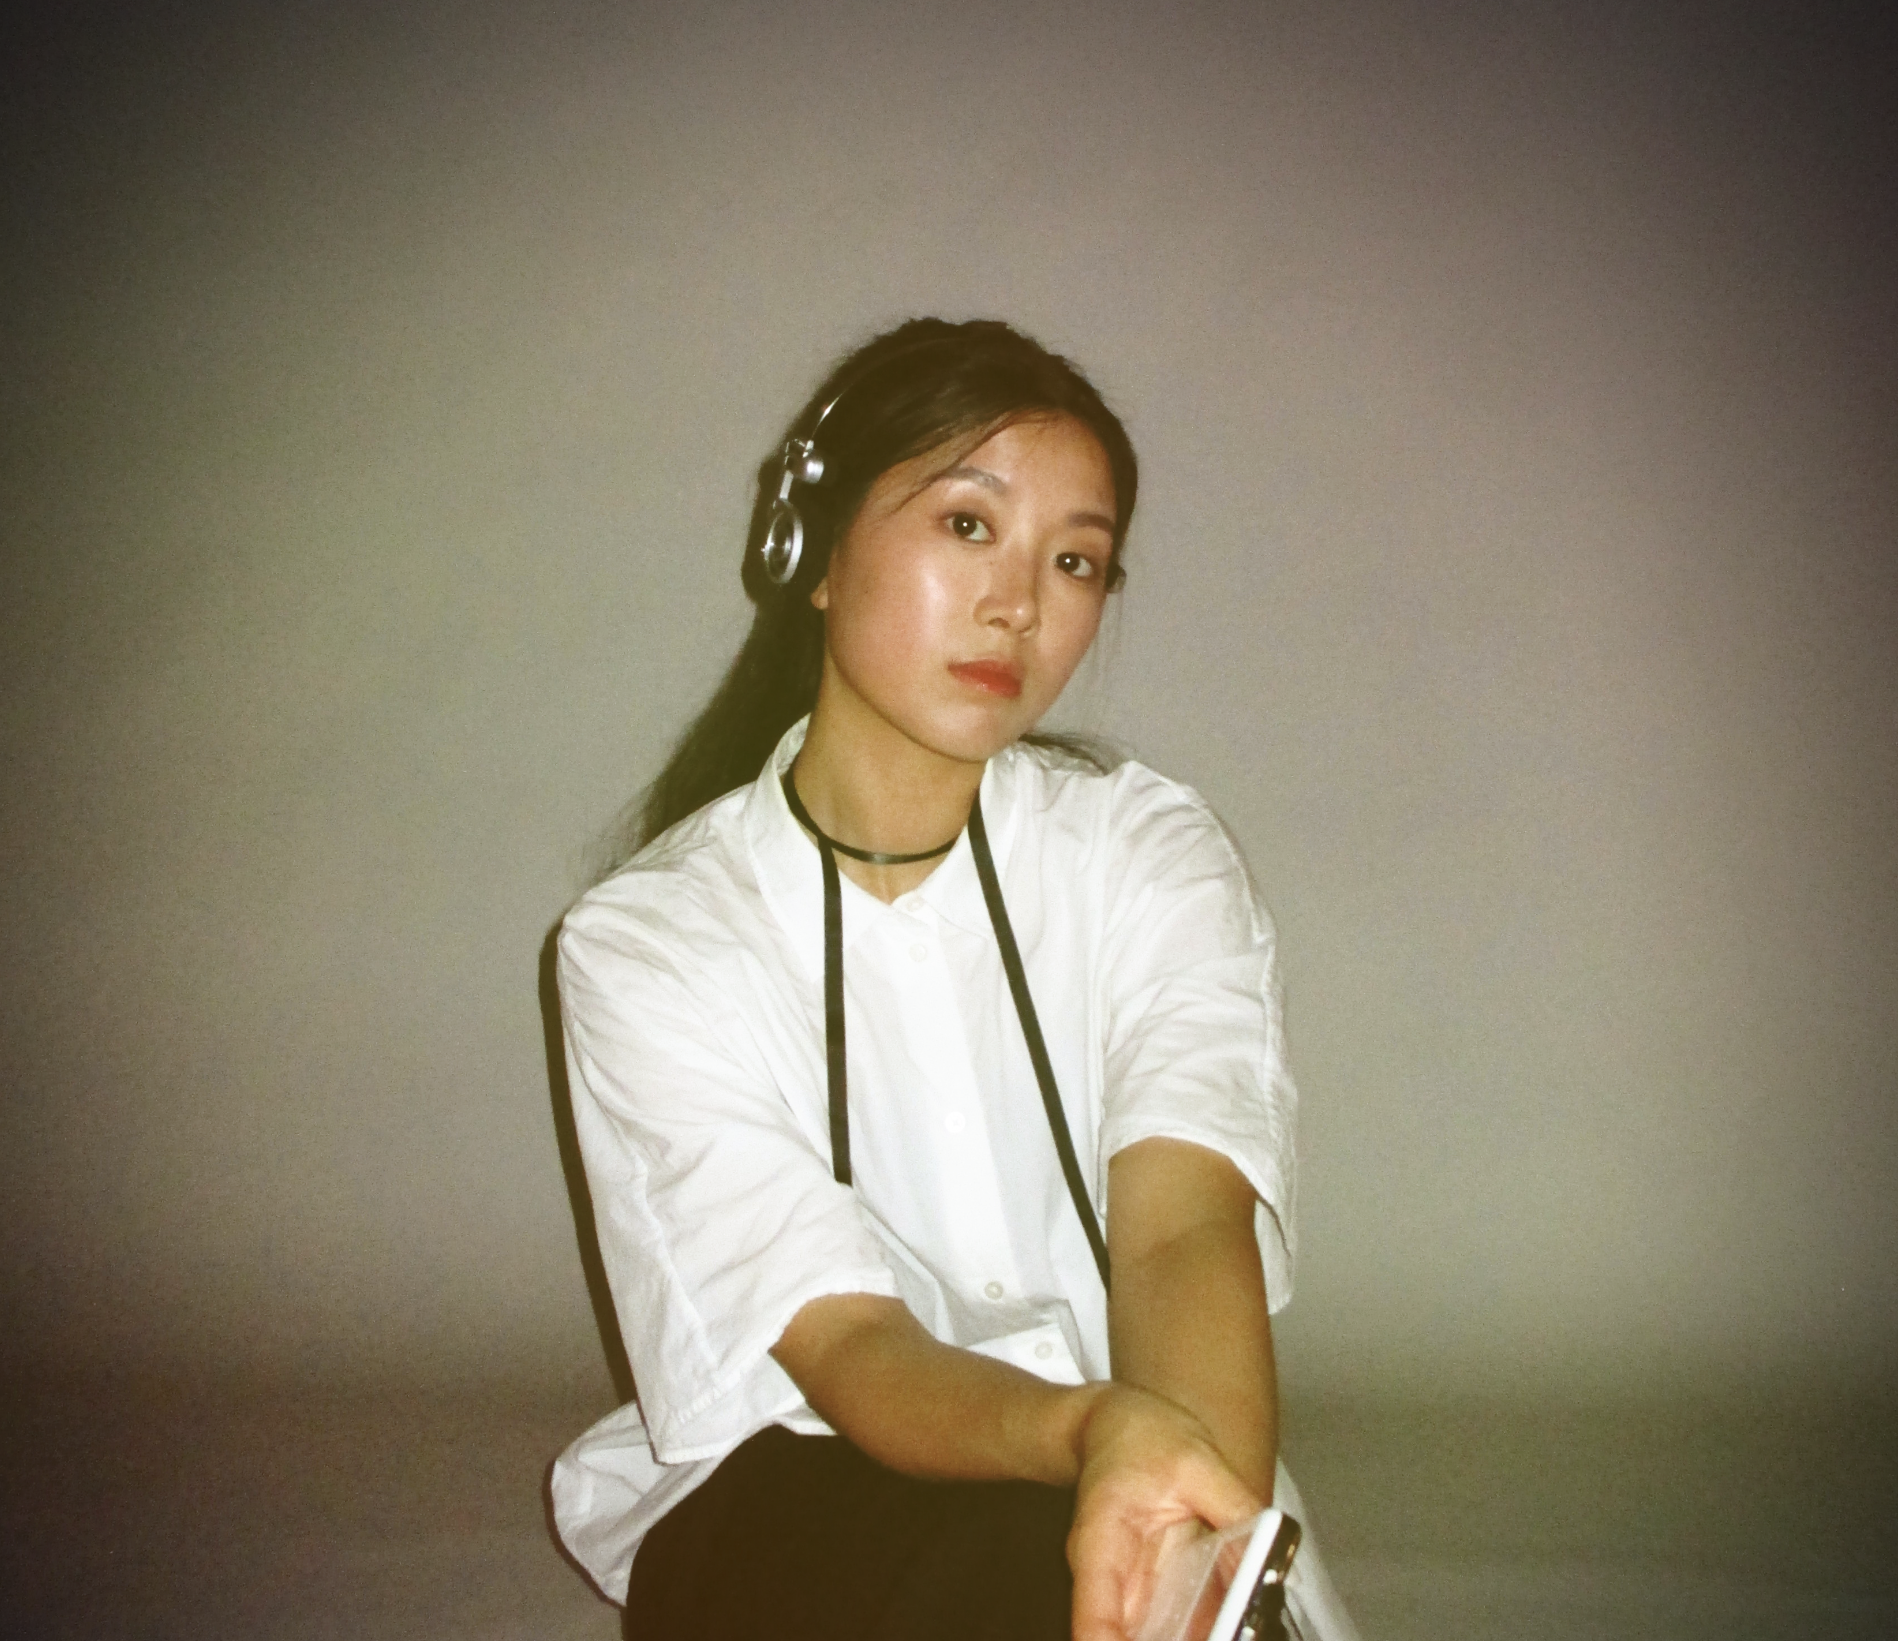 Chinese-American songwriter helenny has recently shared her second single 'this winter'